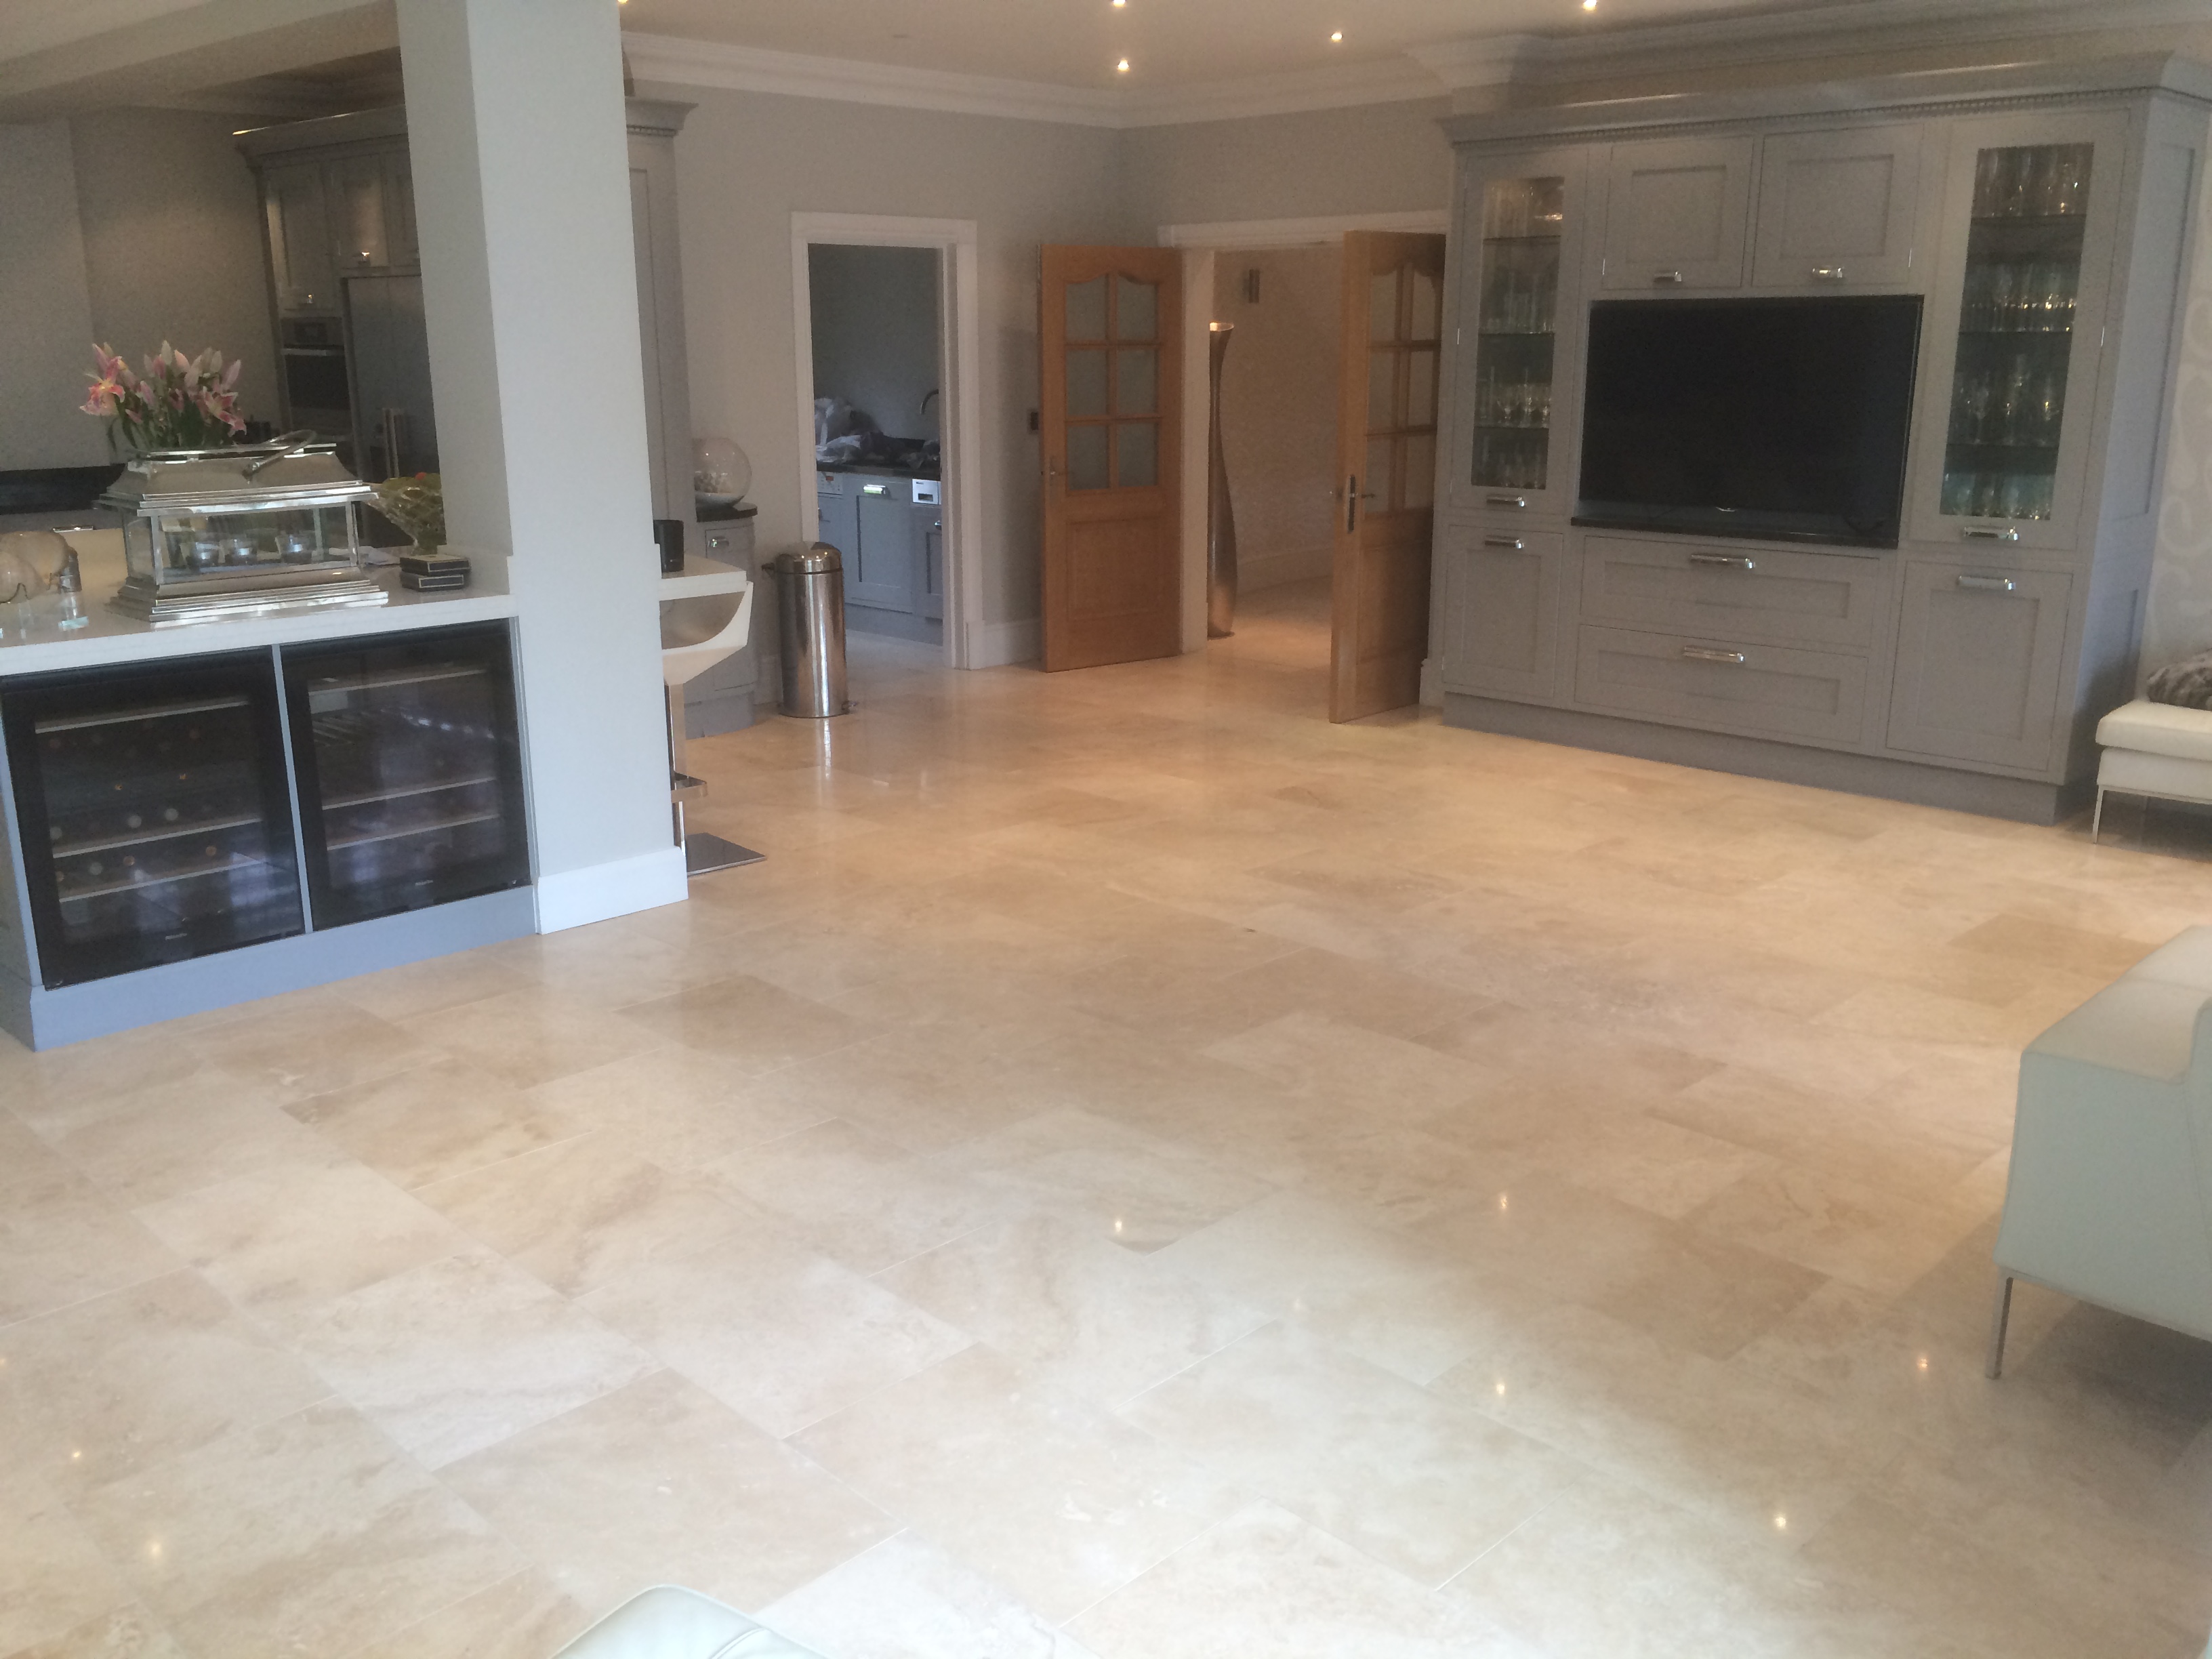 After Cleaning, Polishing and Sealing Travertine Floor